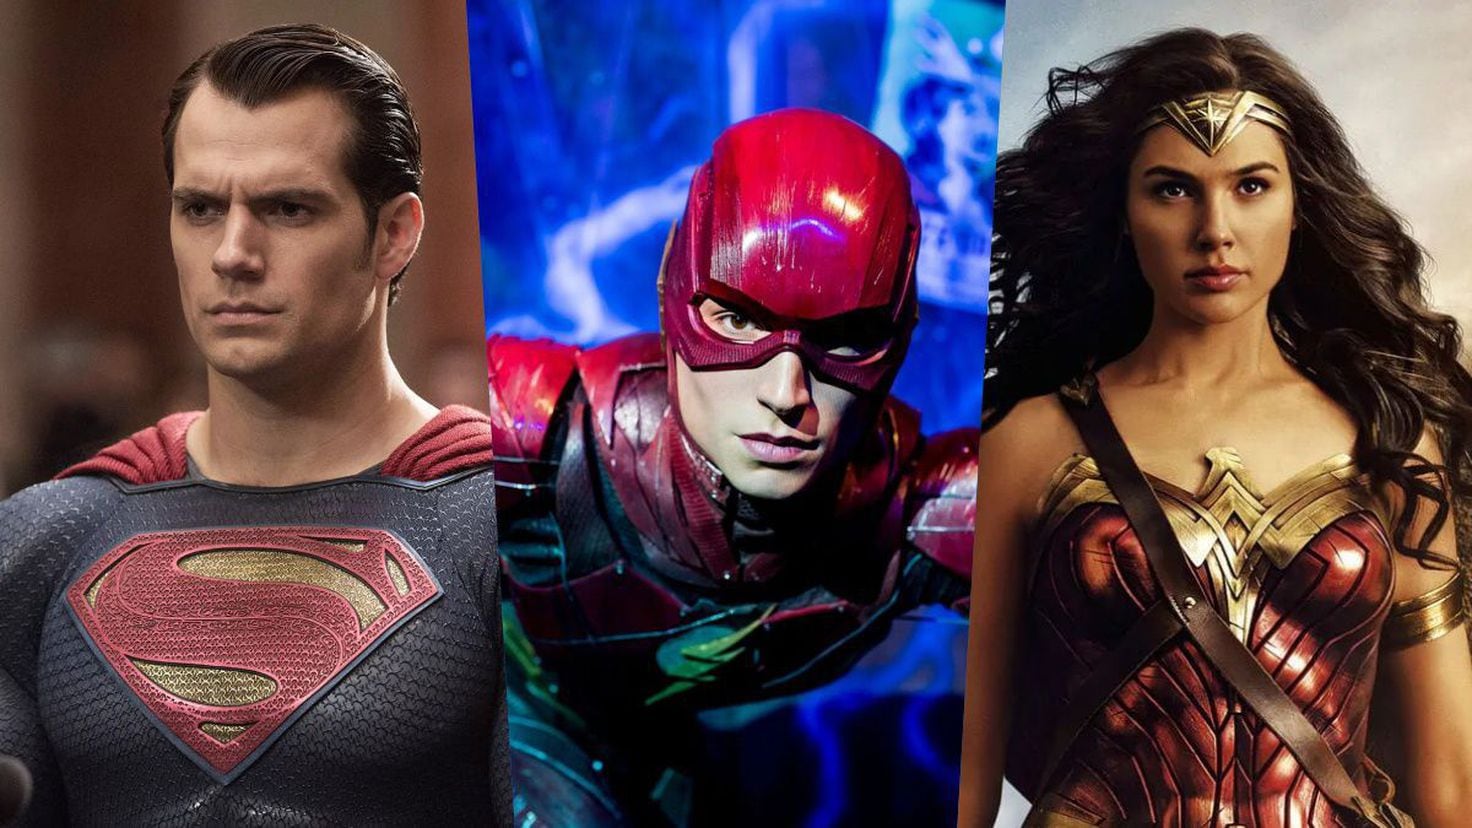 Every Superman Actor In The Flash Movie (Full List)